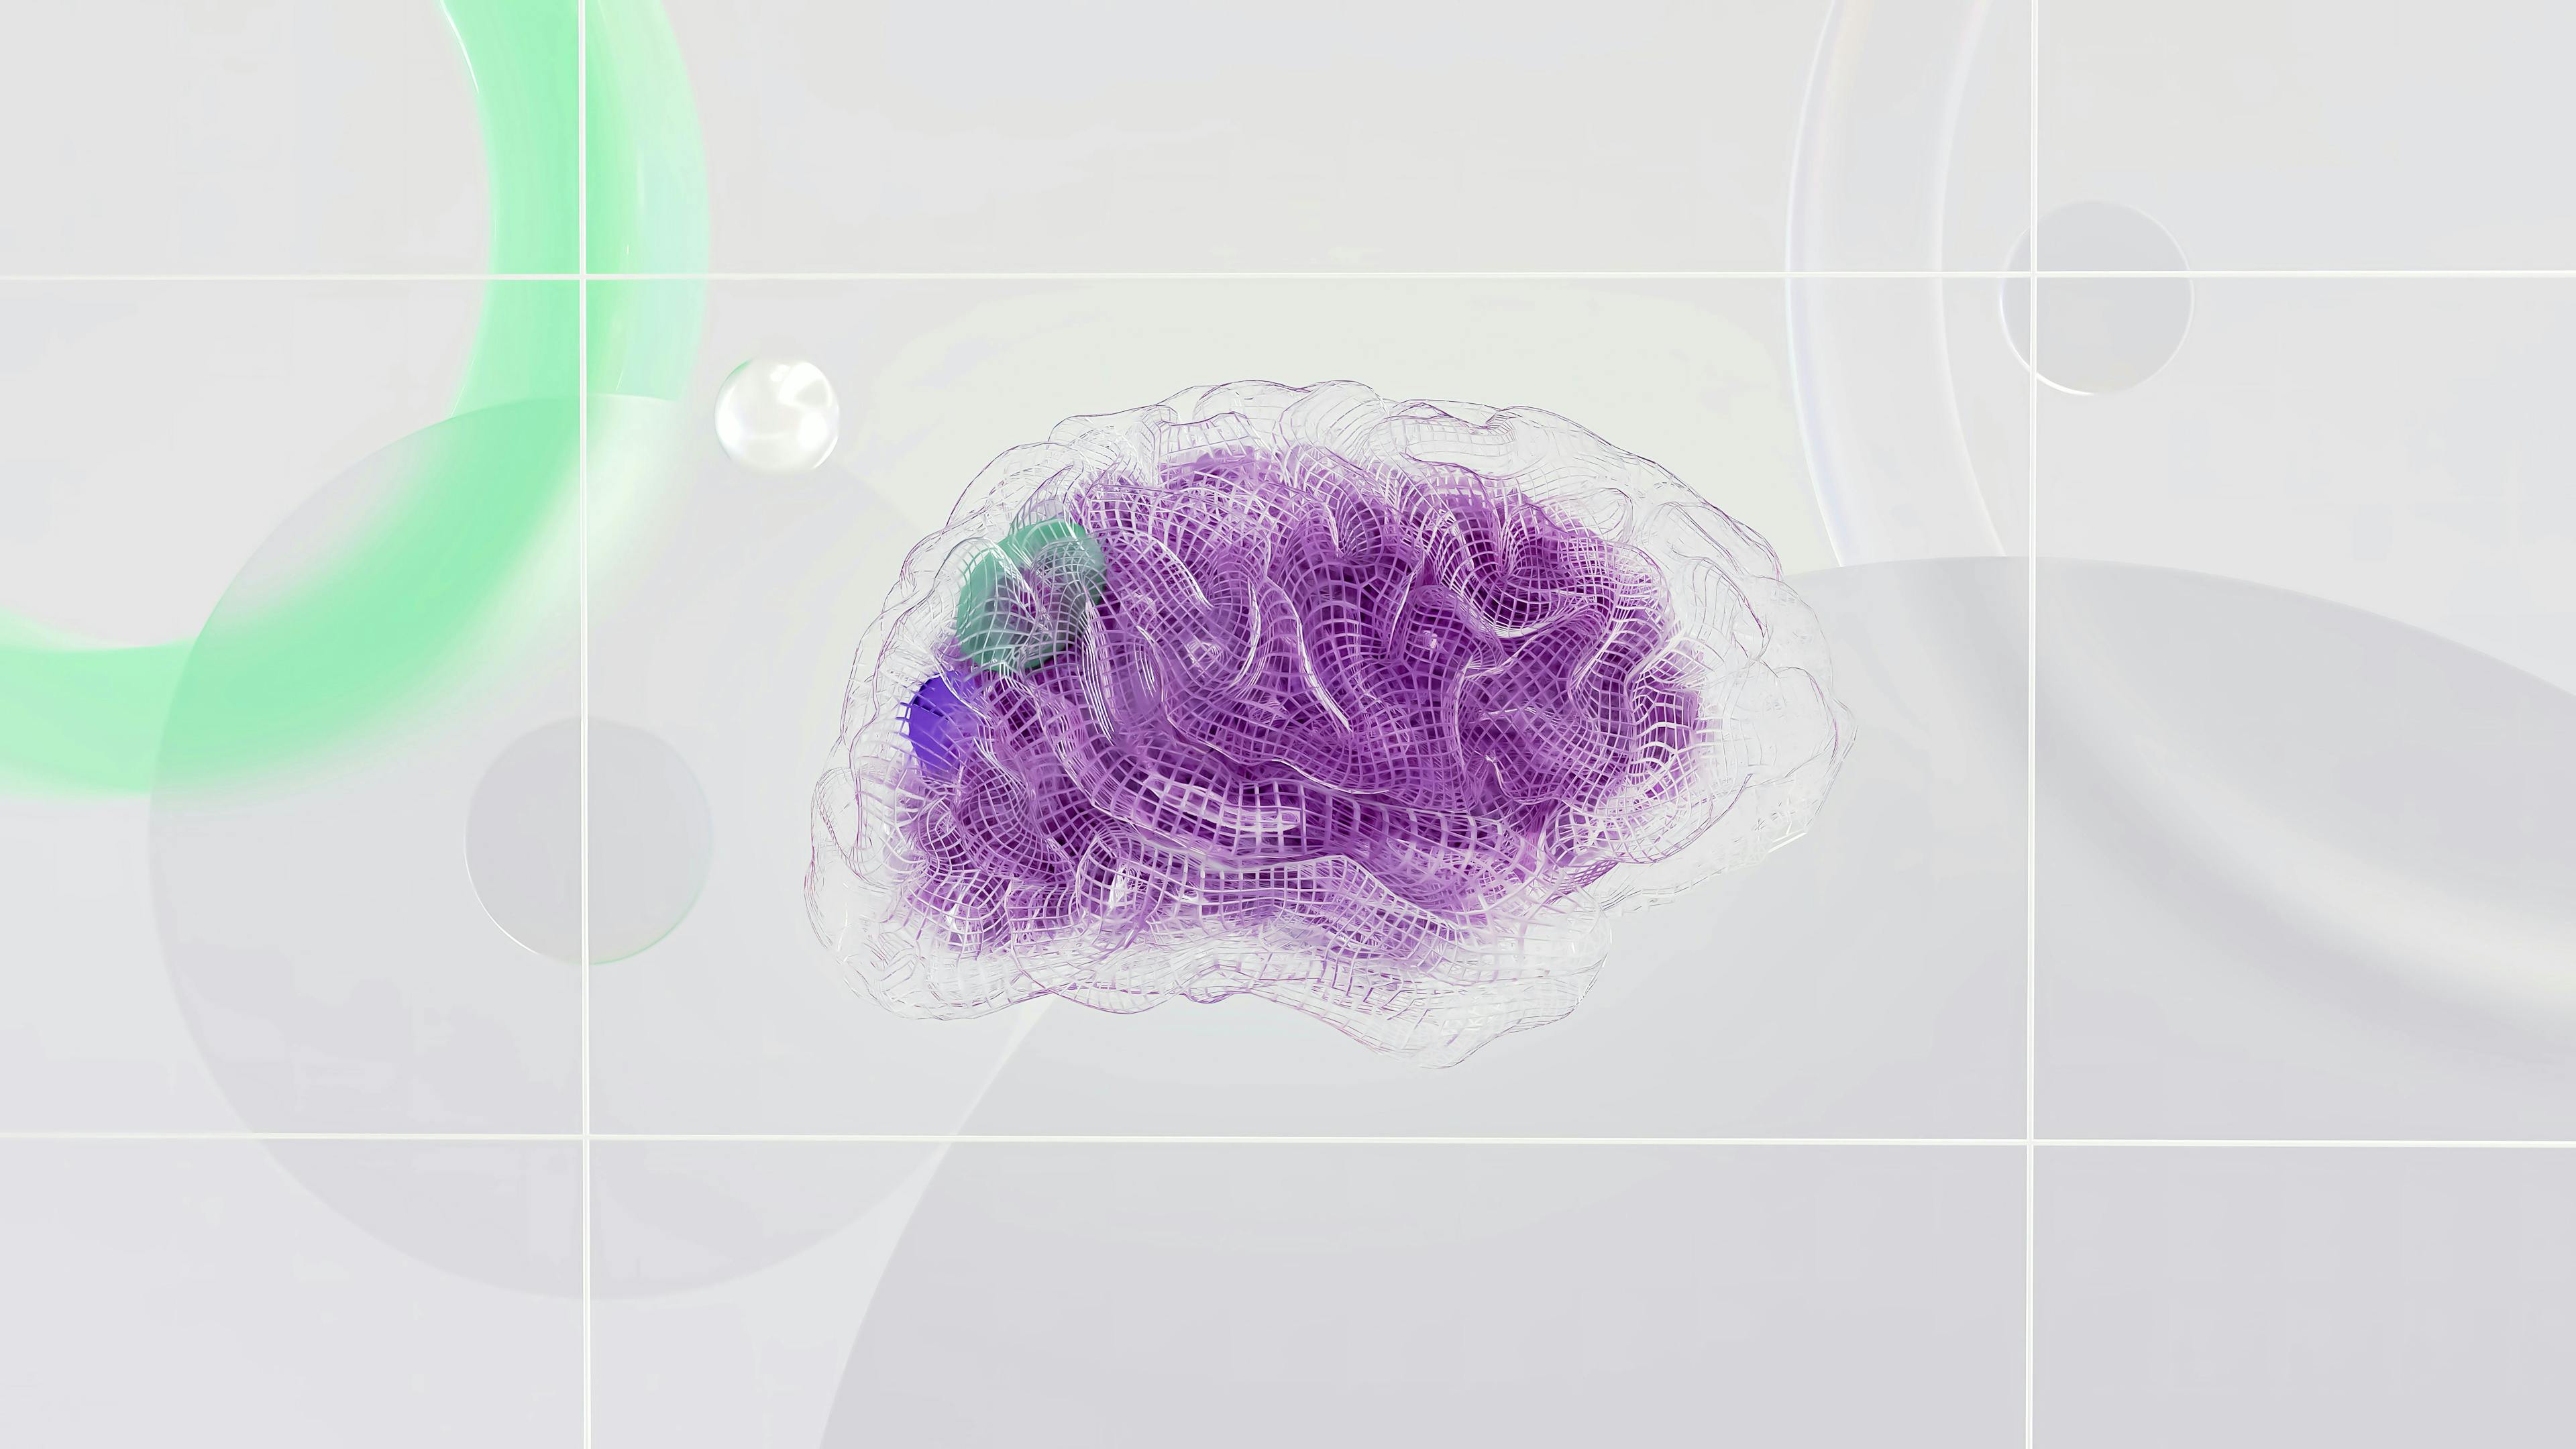 A mesh-rendered 3D brain in shades of purple, overlaid with translucent green sections, set against a light gray background with faint geometric shapes and circular patterns.